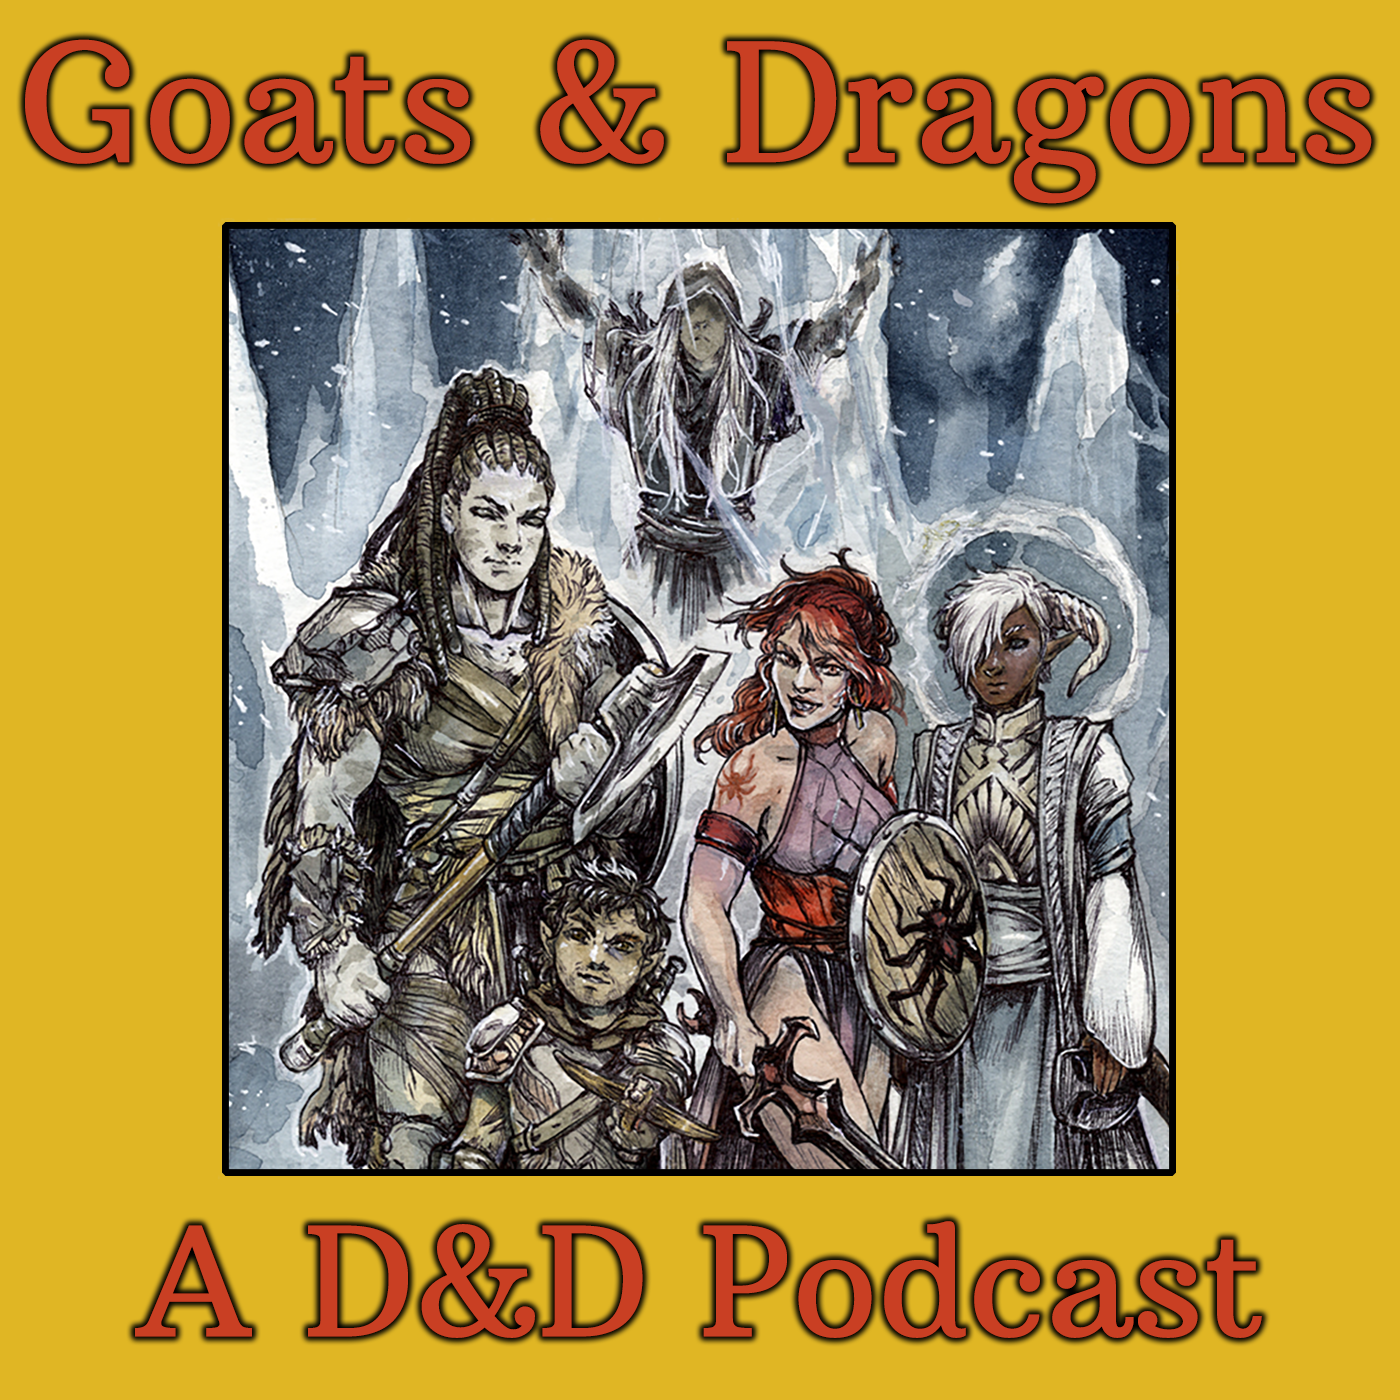 Goats & Dragons: A Dungeons & Dragons Podcast